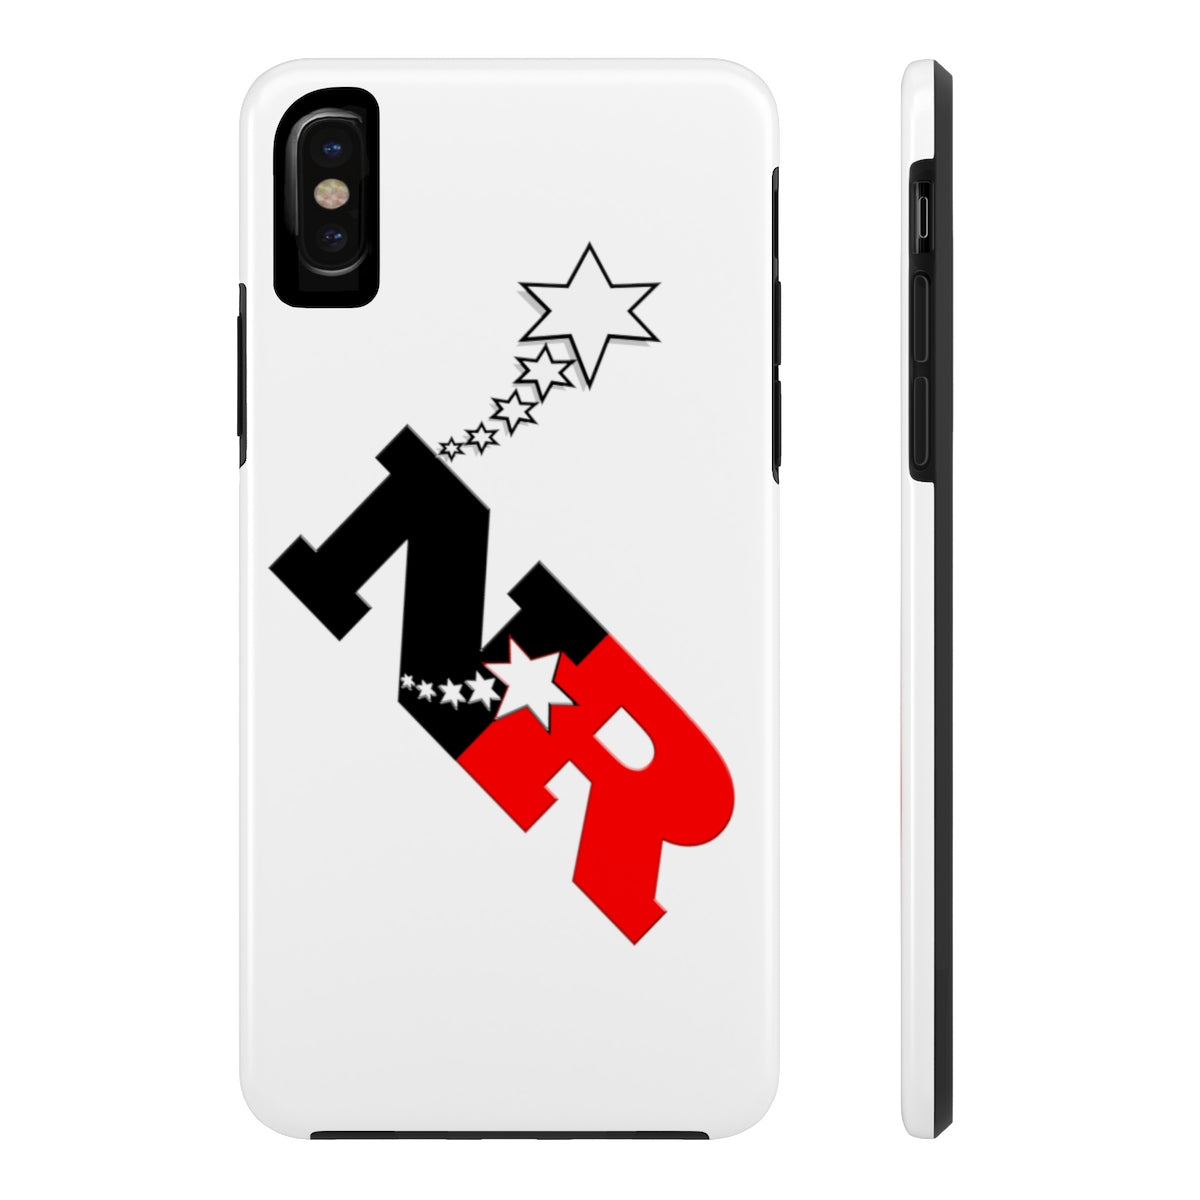 Mate Tough Phone Cases - 6 Points 5 Stars (White)